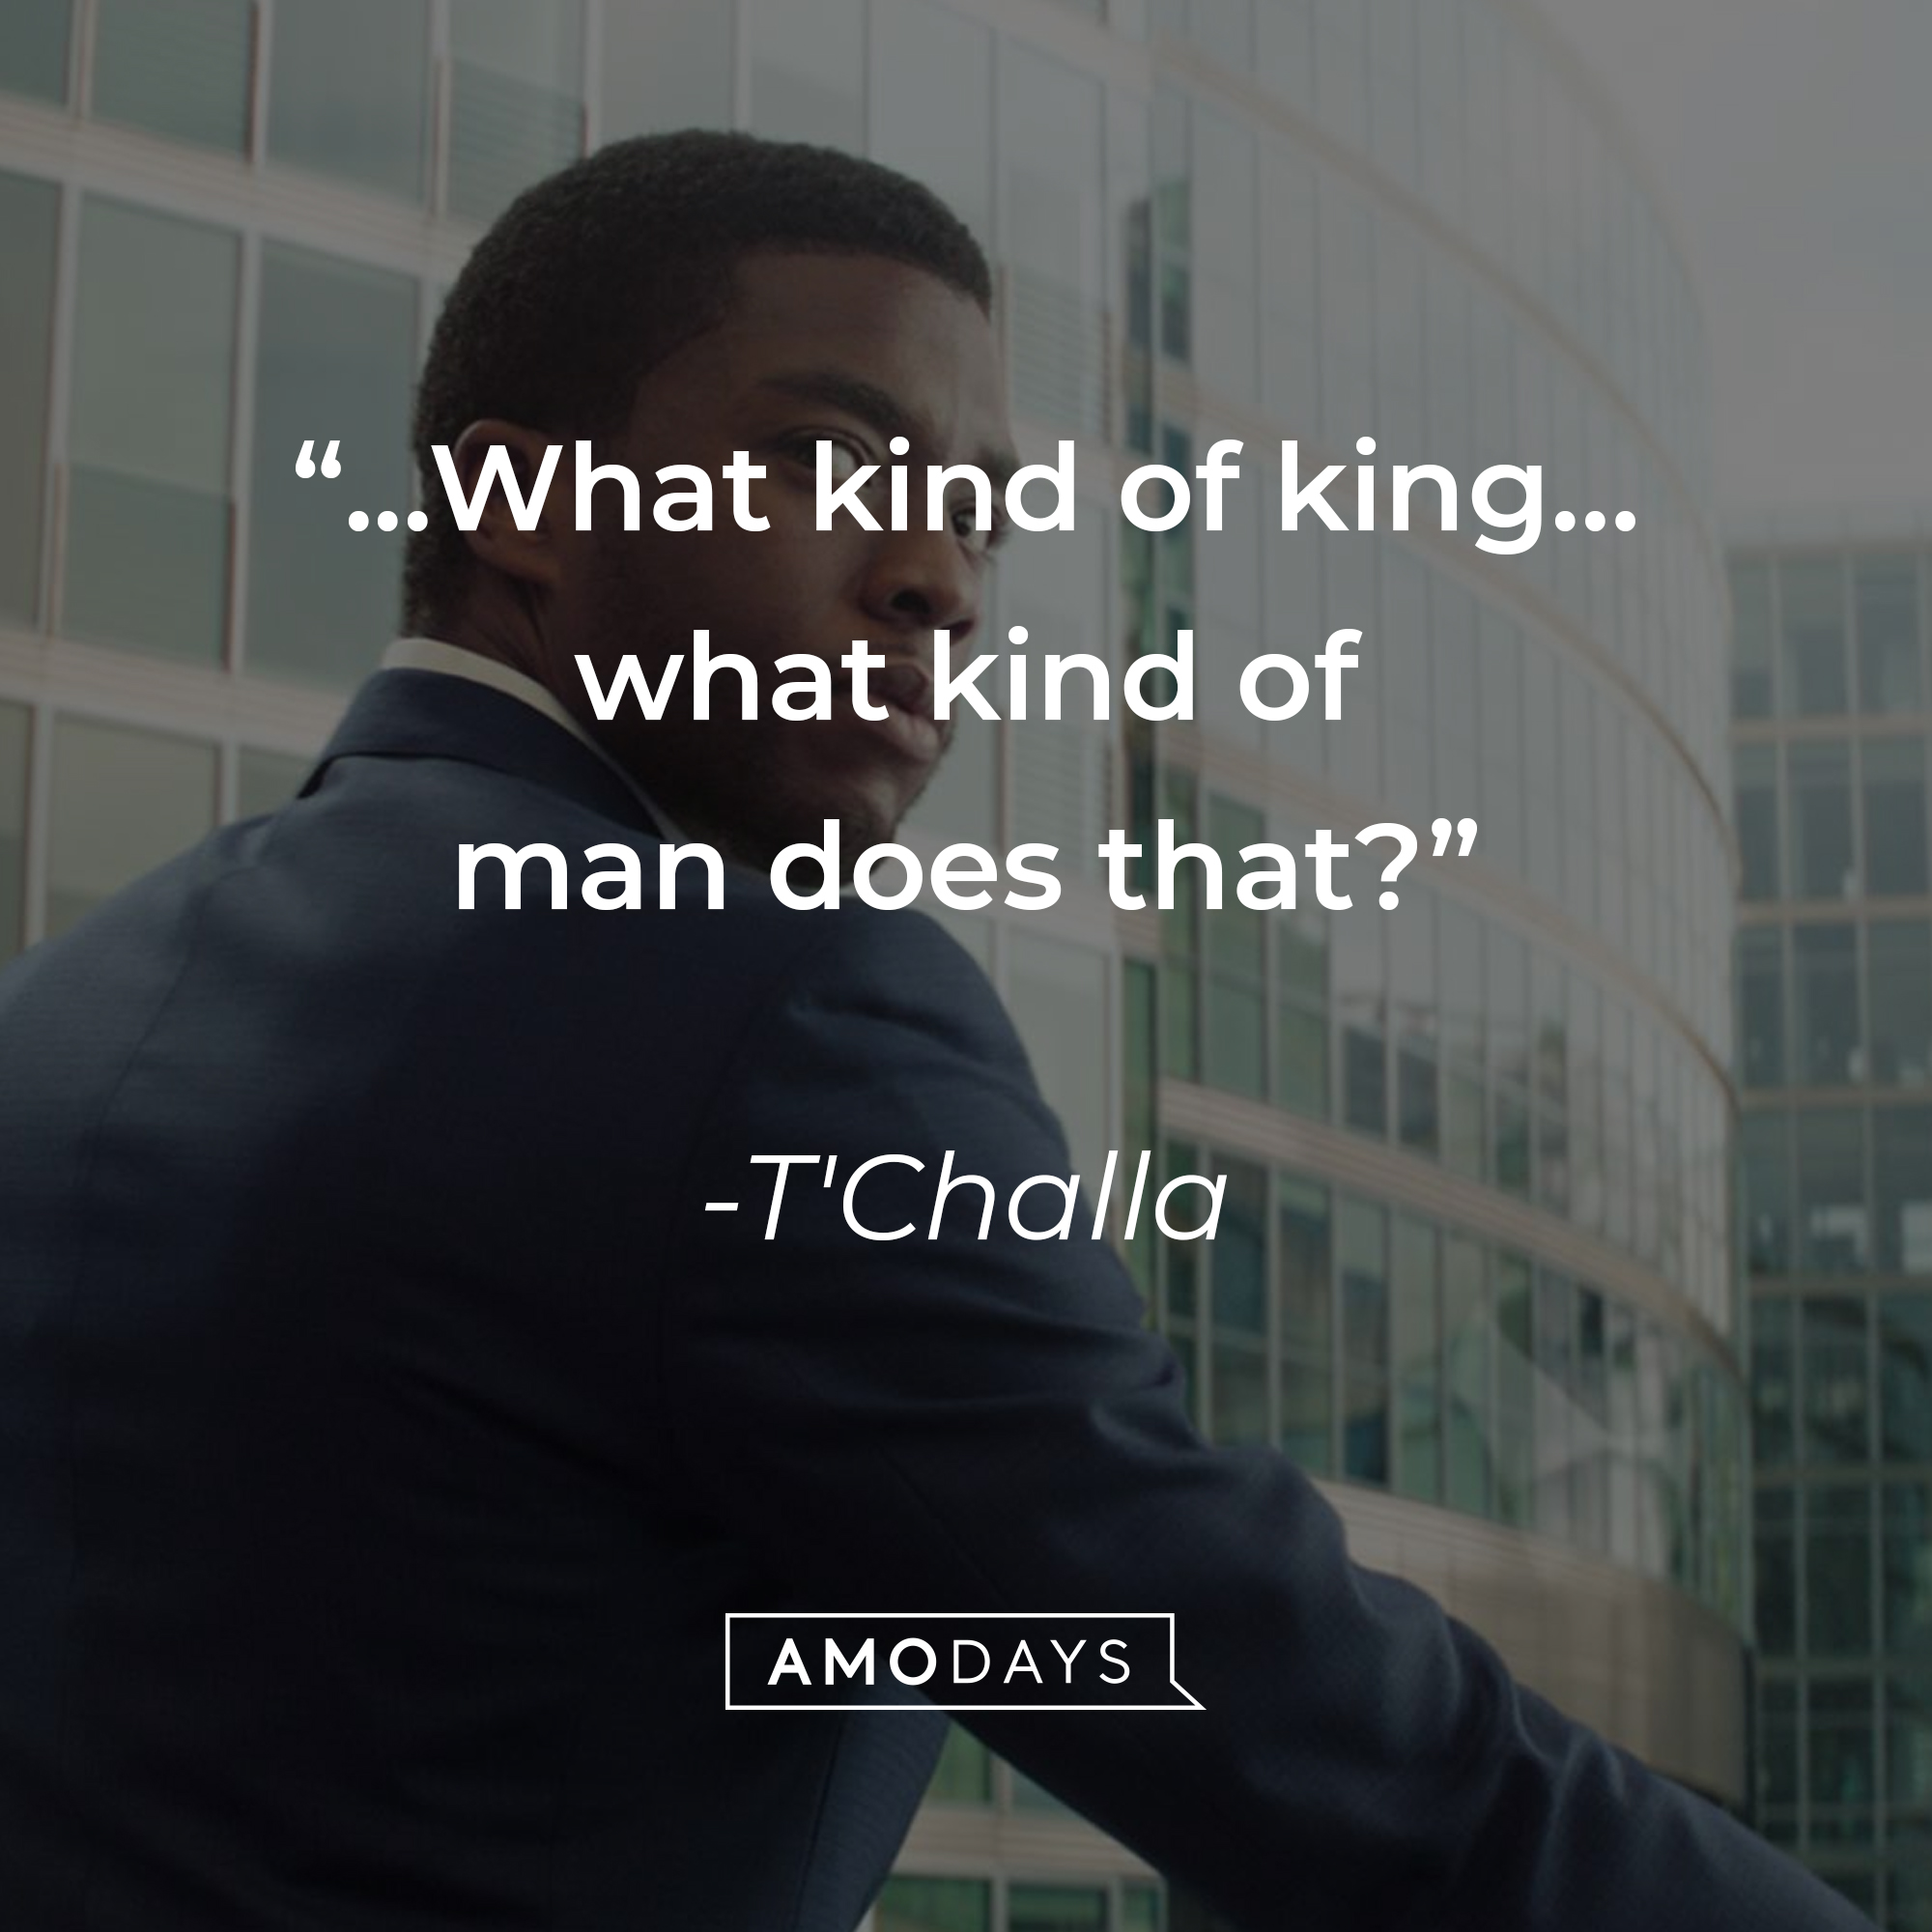 T'Challa's quote: “...What kind of king… what kind of man does that?” | Source: facebook.com/BlackPantherMovie